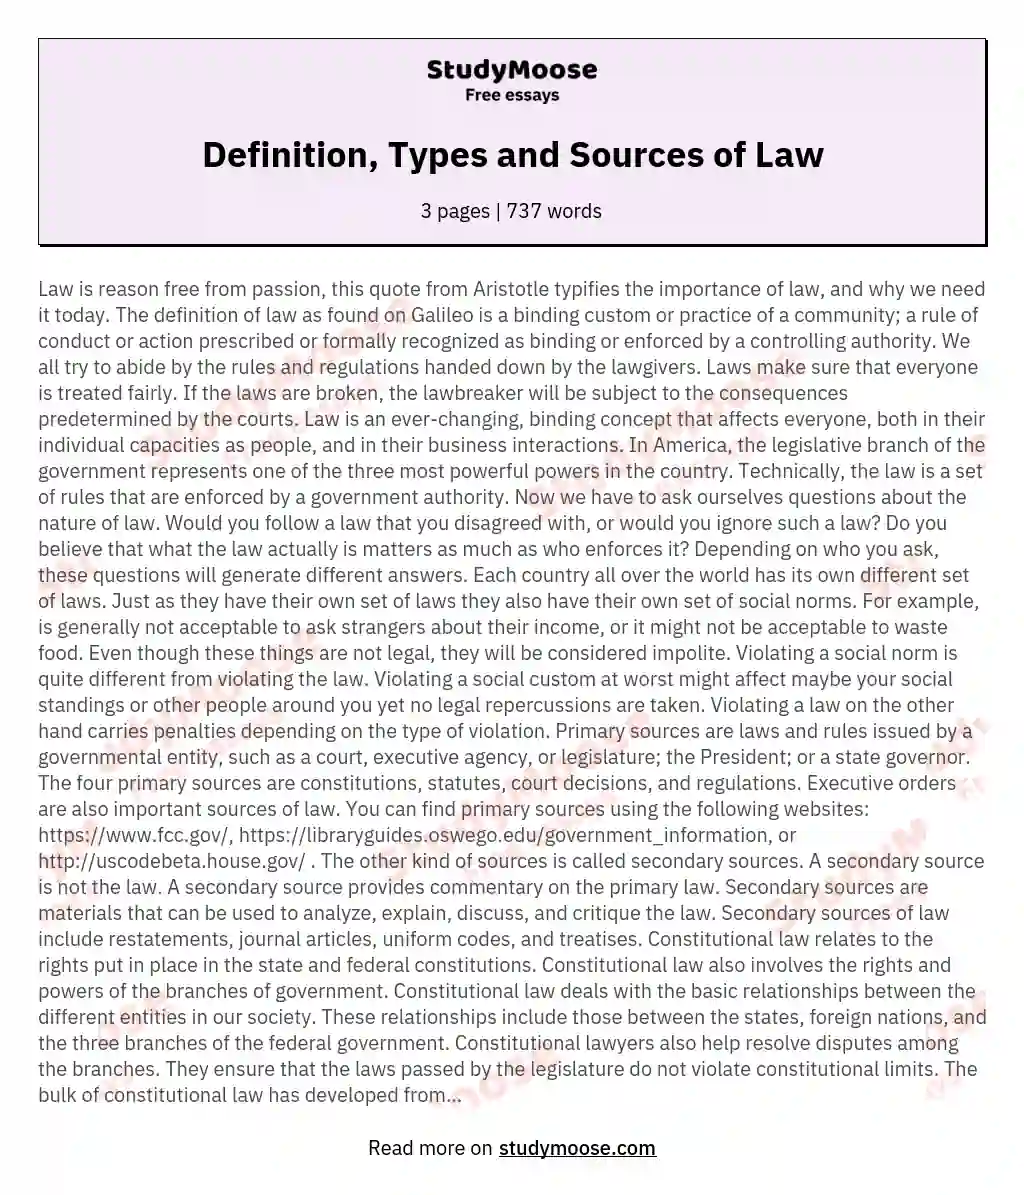 sources of english law essay